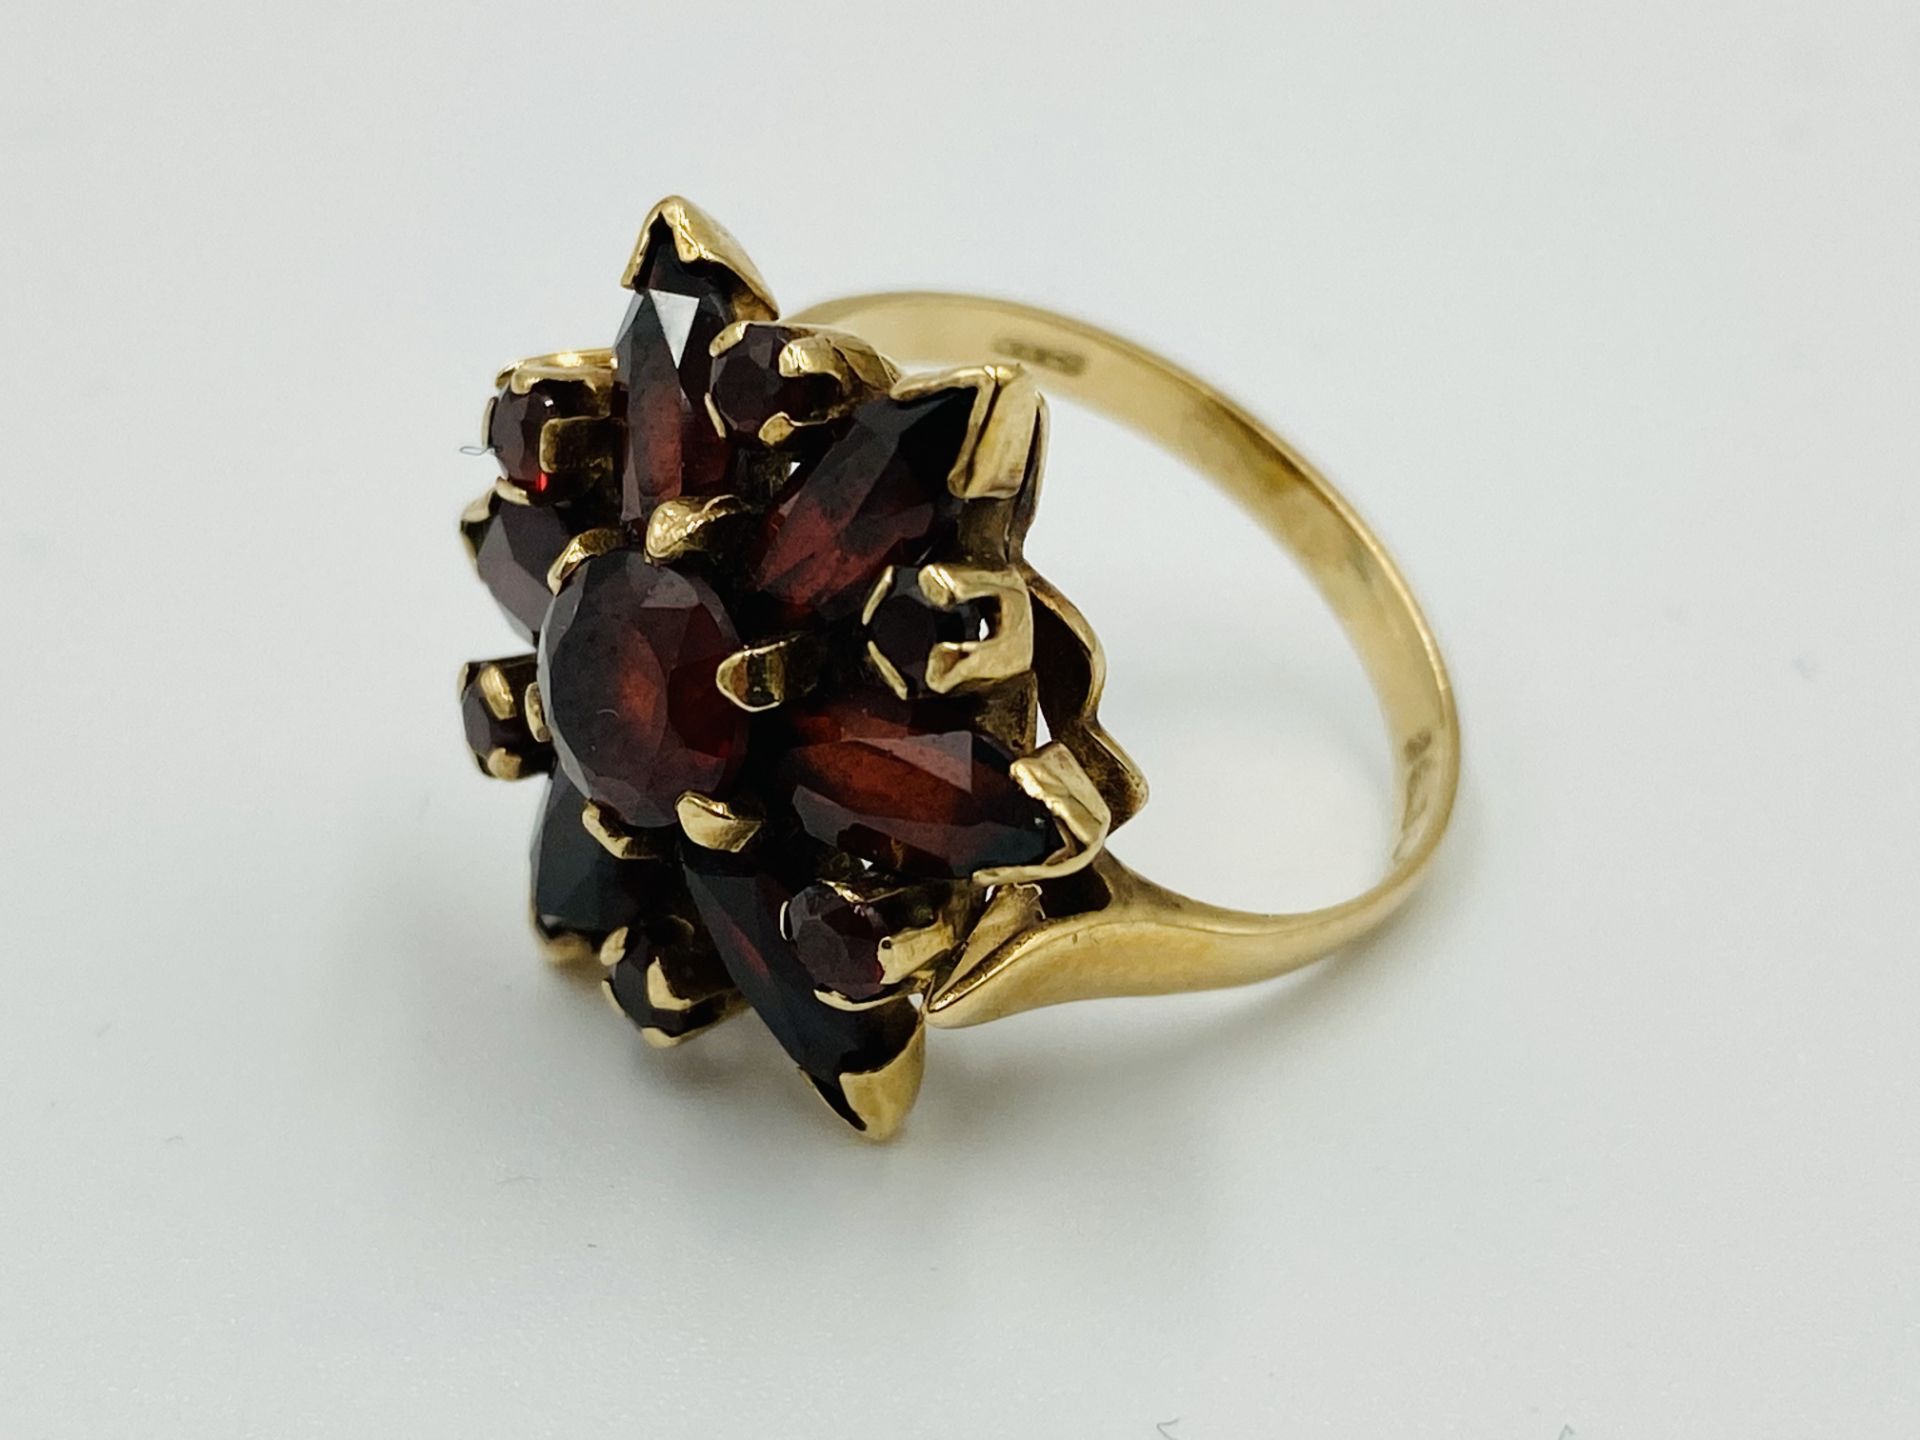 9ct gold ring - Image 2 of 5